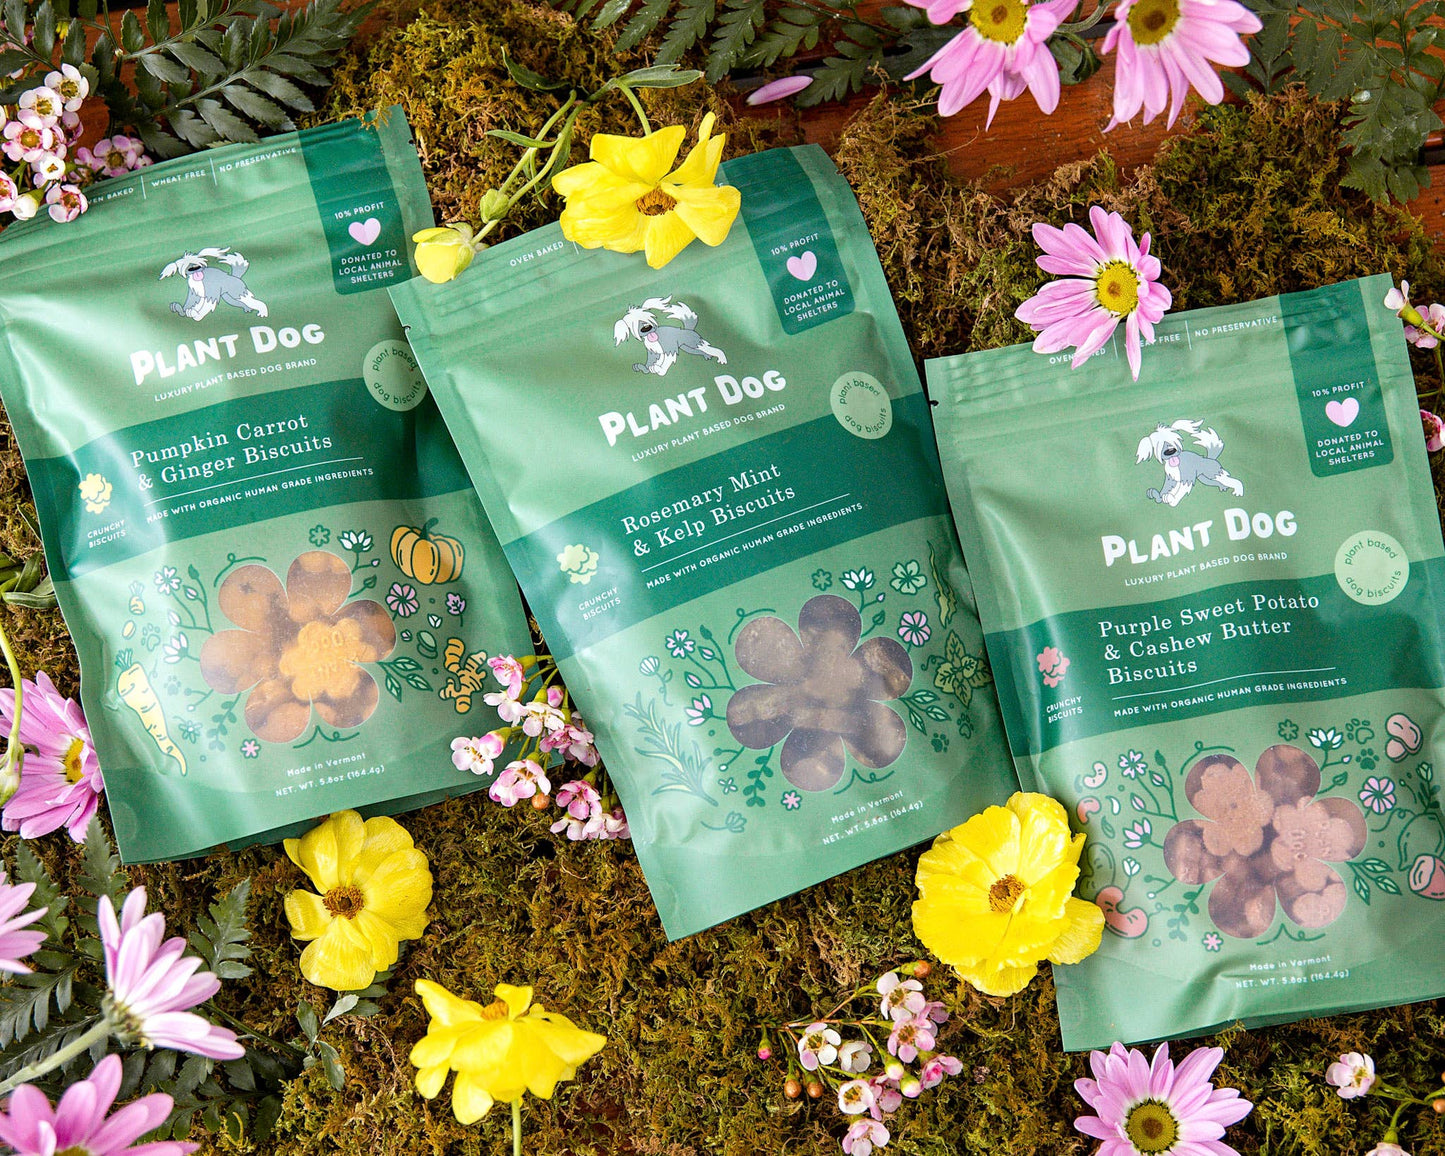 Plant Dog - Rosemary Mint and Kelp Dog Biscuits- Natural Breath Refresher